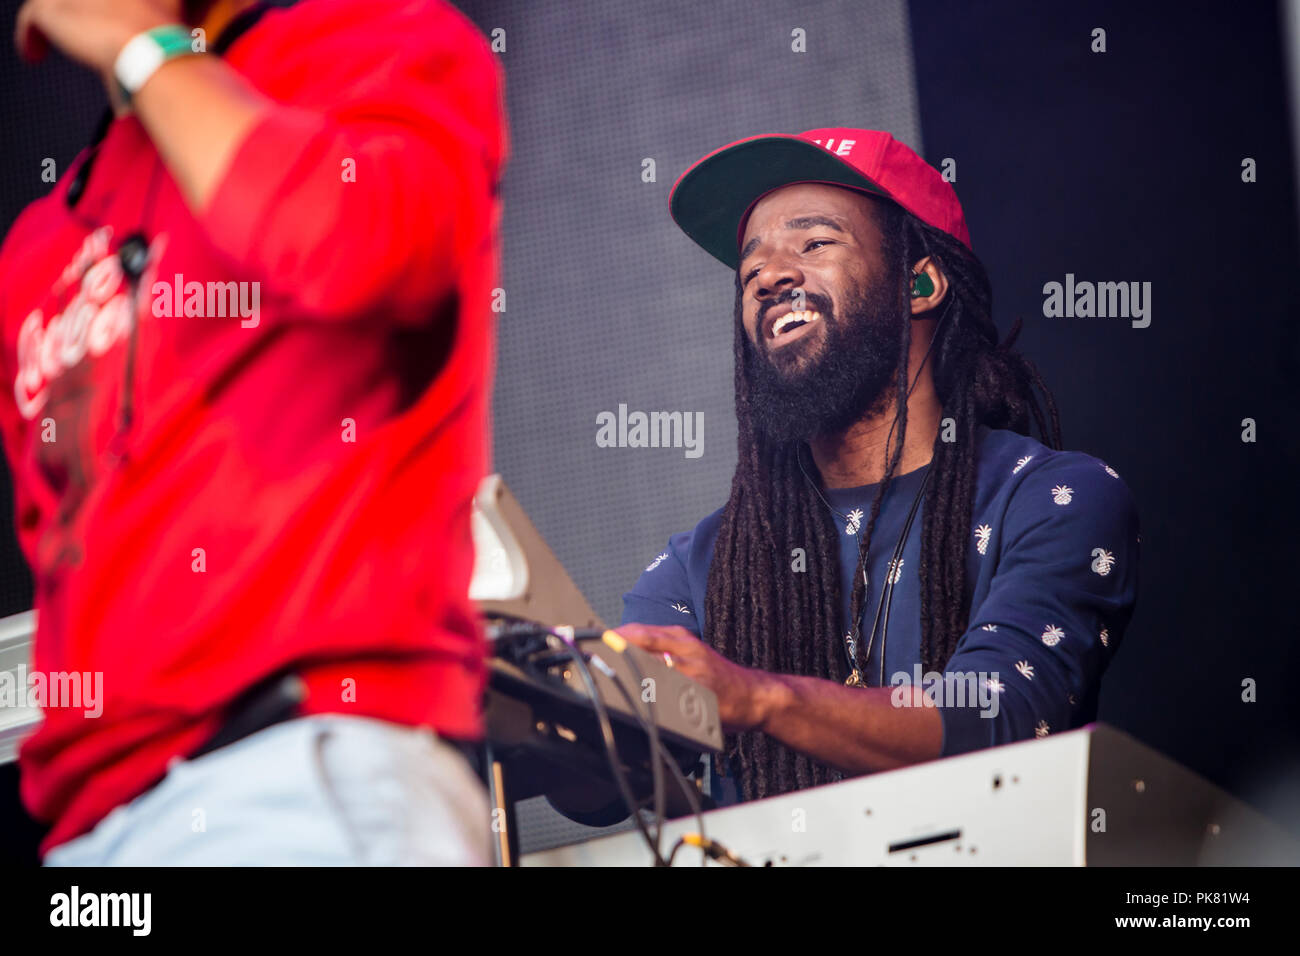 Norway, Bergen - June 15, 2018. The American funk and soul group Tank and the Bangas performs a live concert during the Norwegian music festival Bergenfest 2018 in Bergen.(Photo credit: Gonzales Photo - Jarle H. Moe). Stock Photo